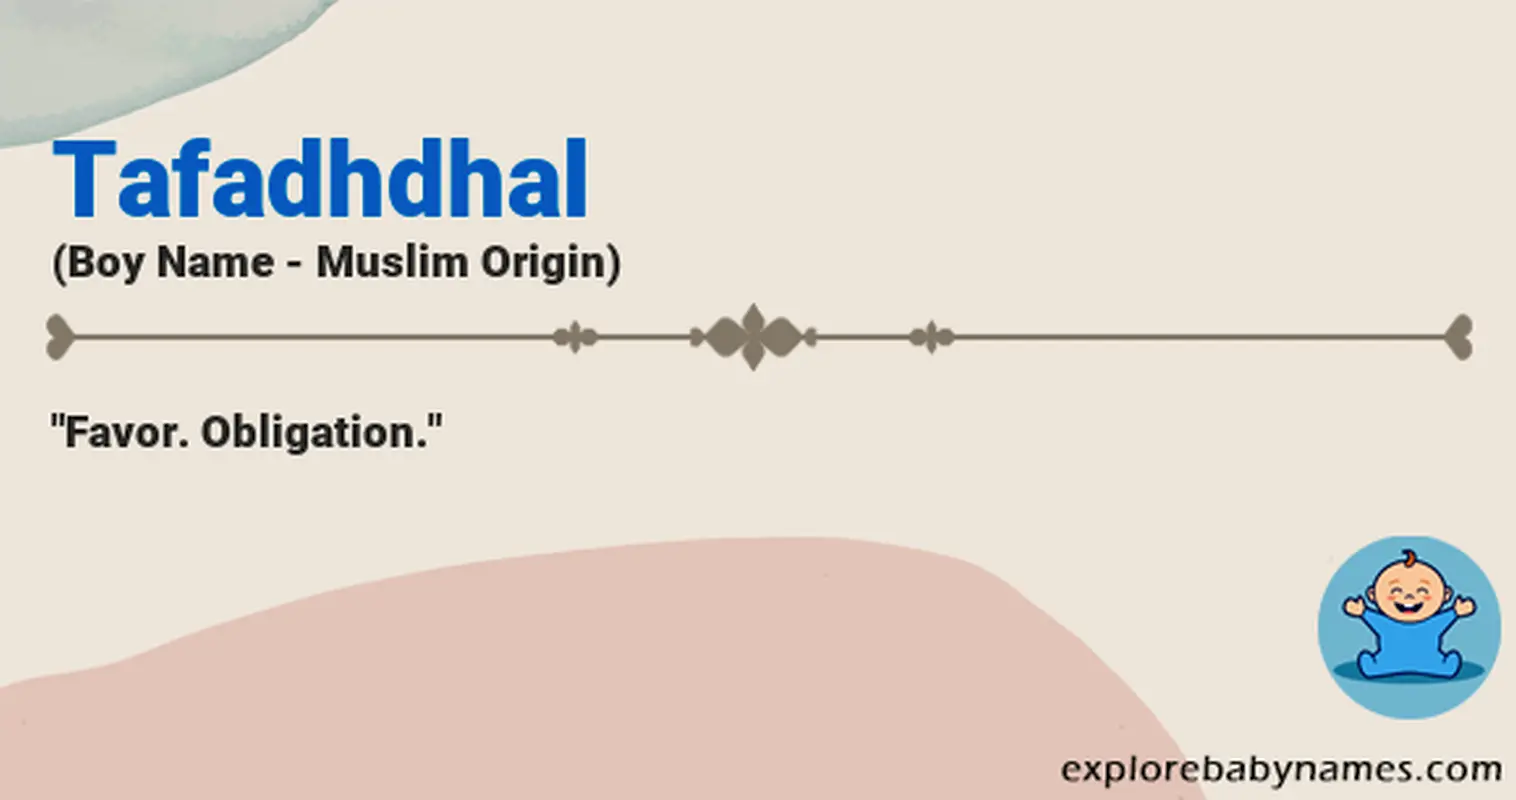 Meaning of Tafadhdhal